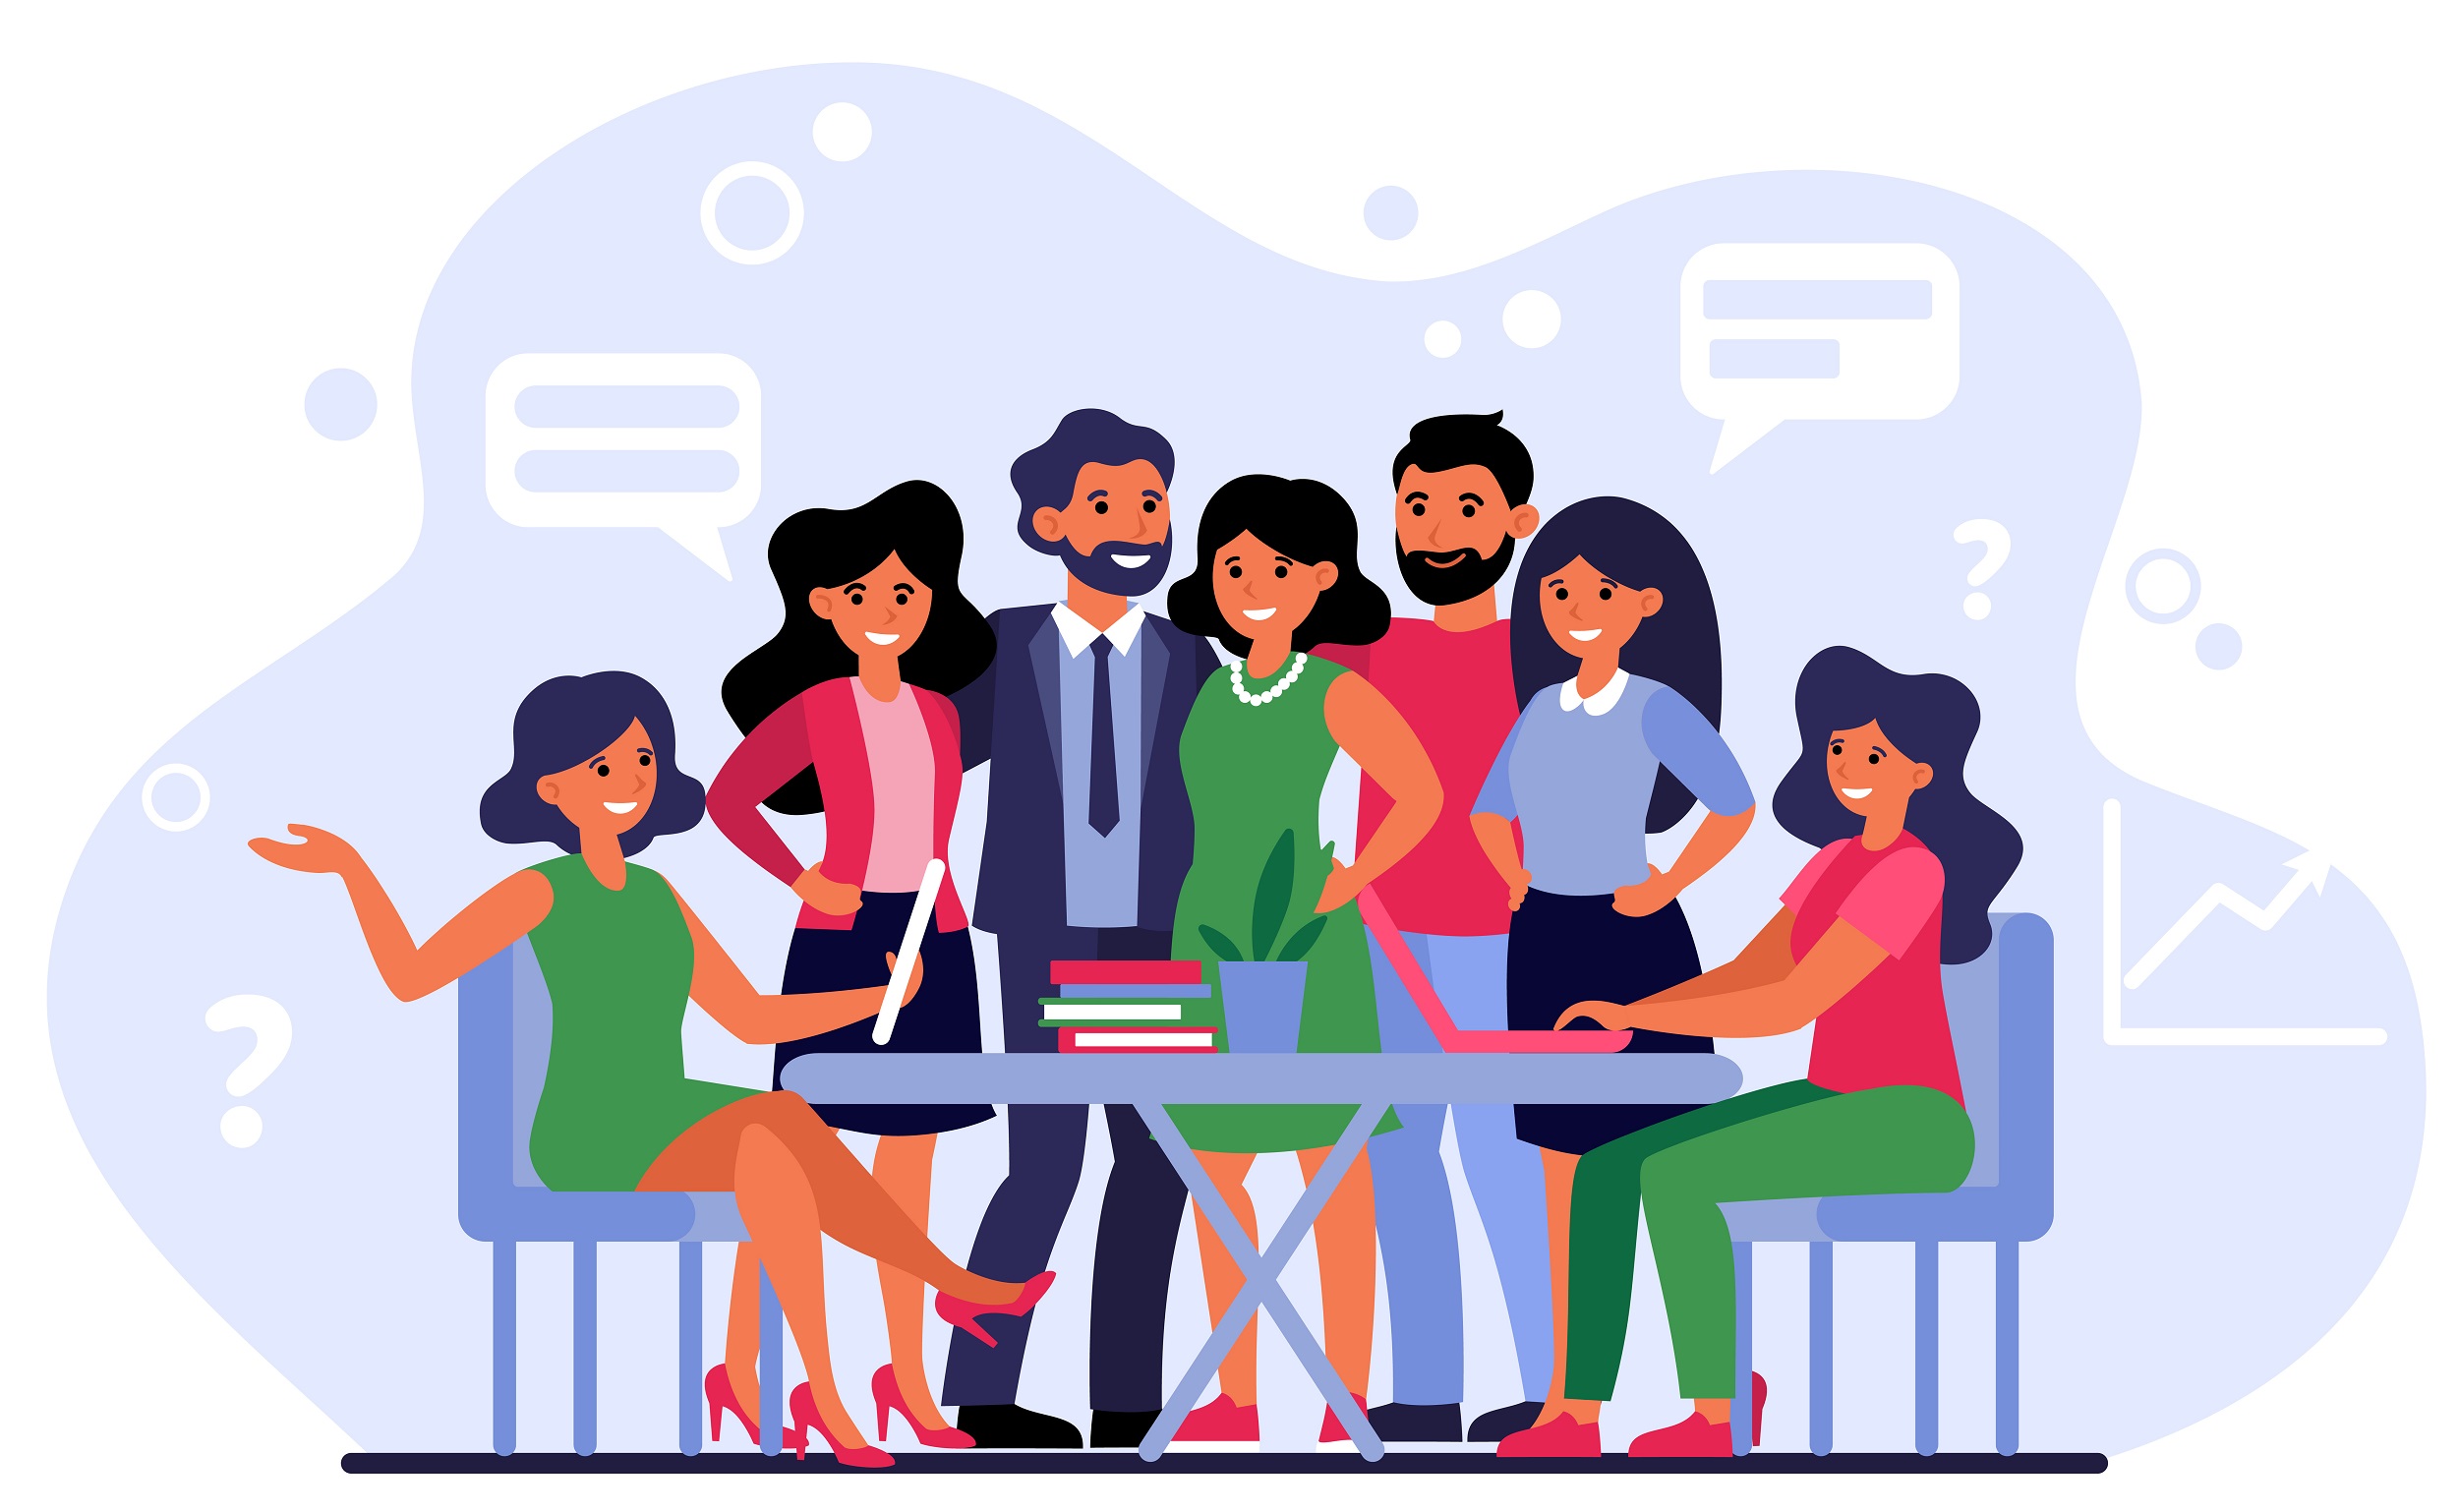 Happy united business team. Colleagues, group of office employees standing together flat vector illustration. Teamwork, success, unity concept for banner, website design or landing web page